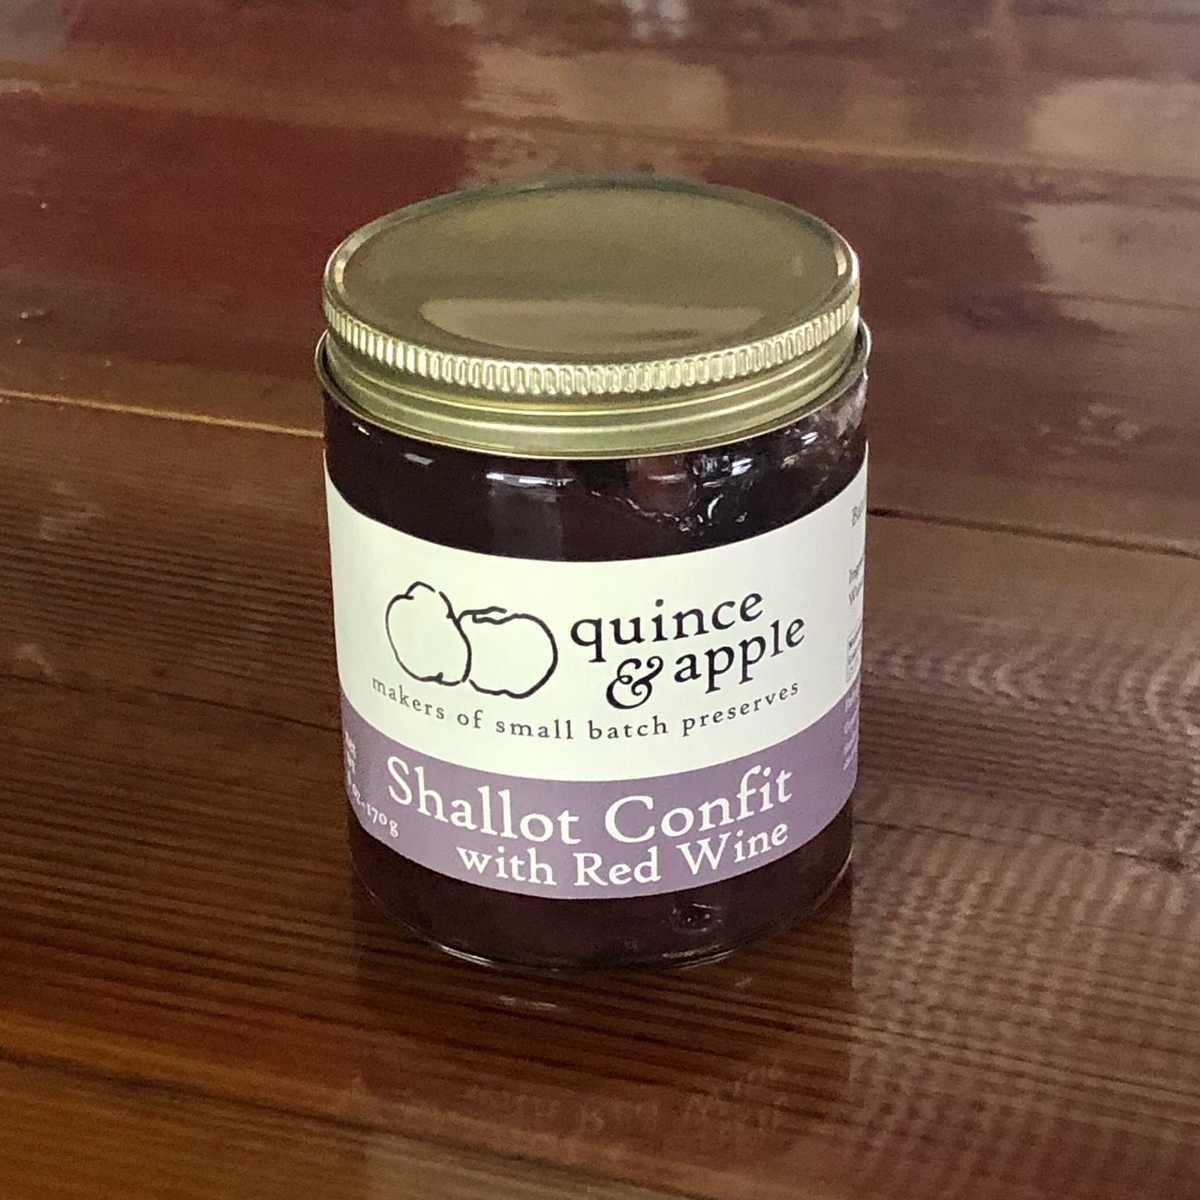 Shallot Confit with Red Wine - your next level onion jam - Quince